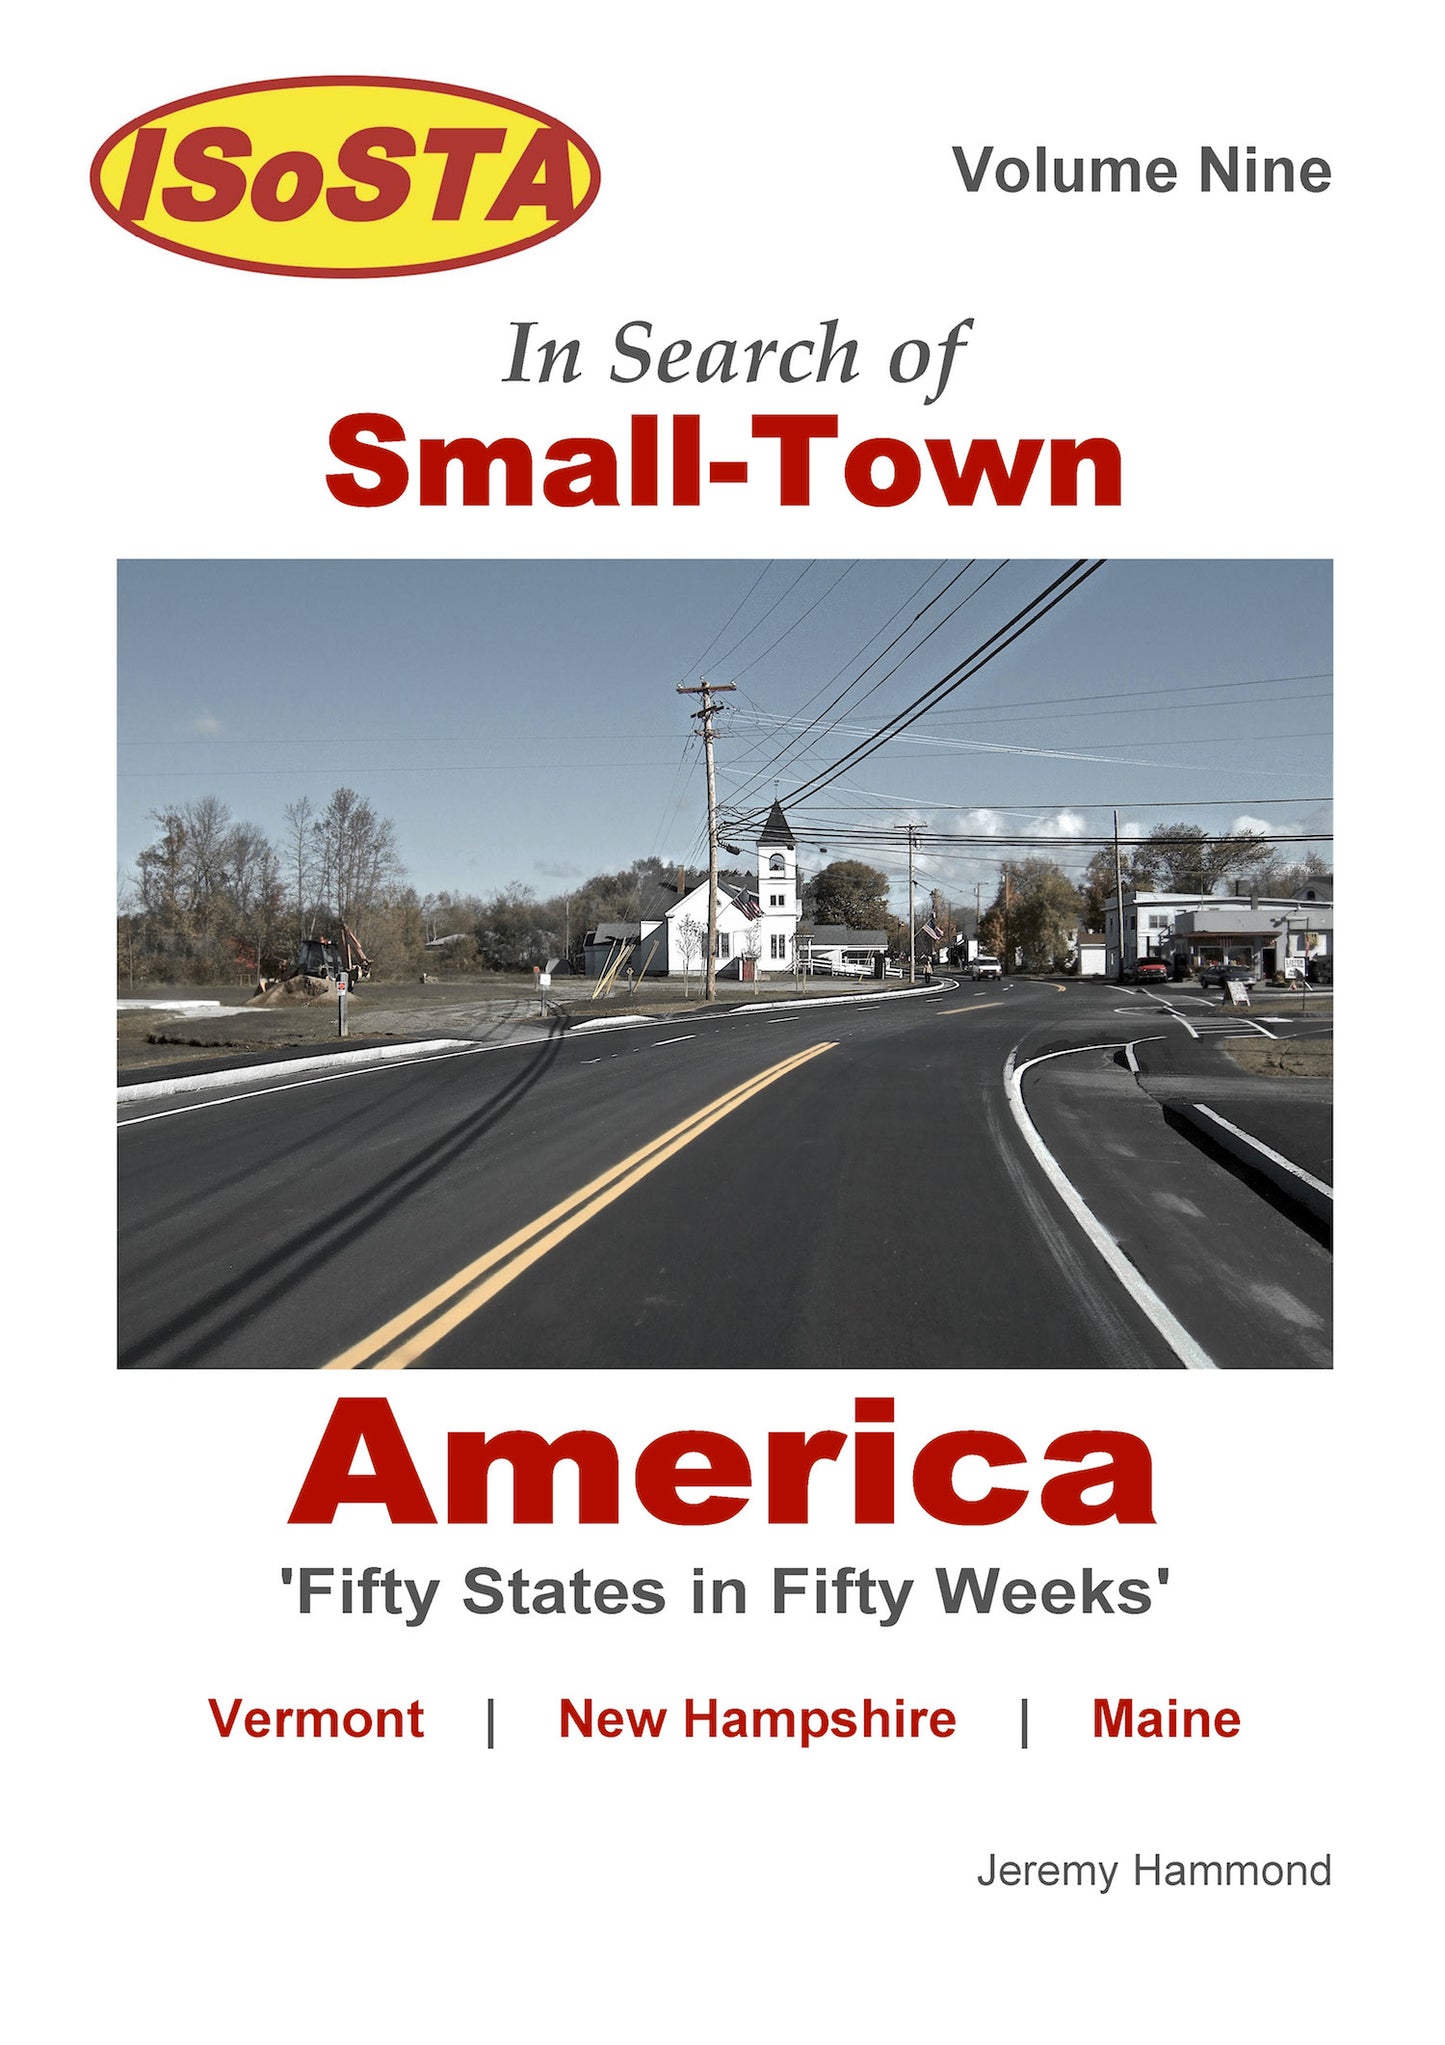 In Search of Small-Town America: Volume 9